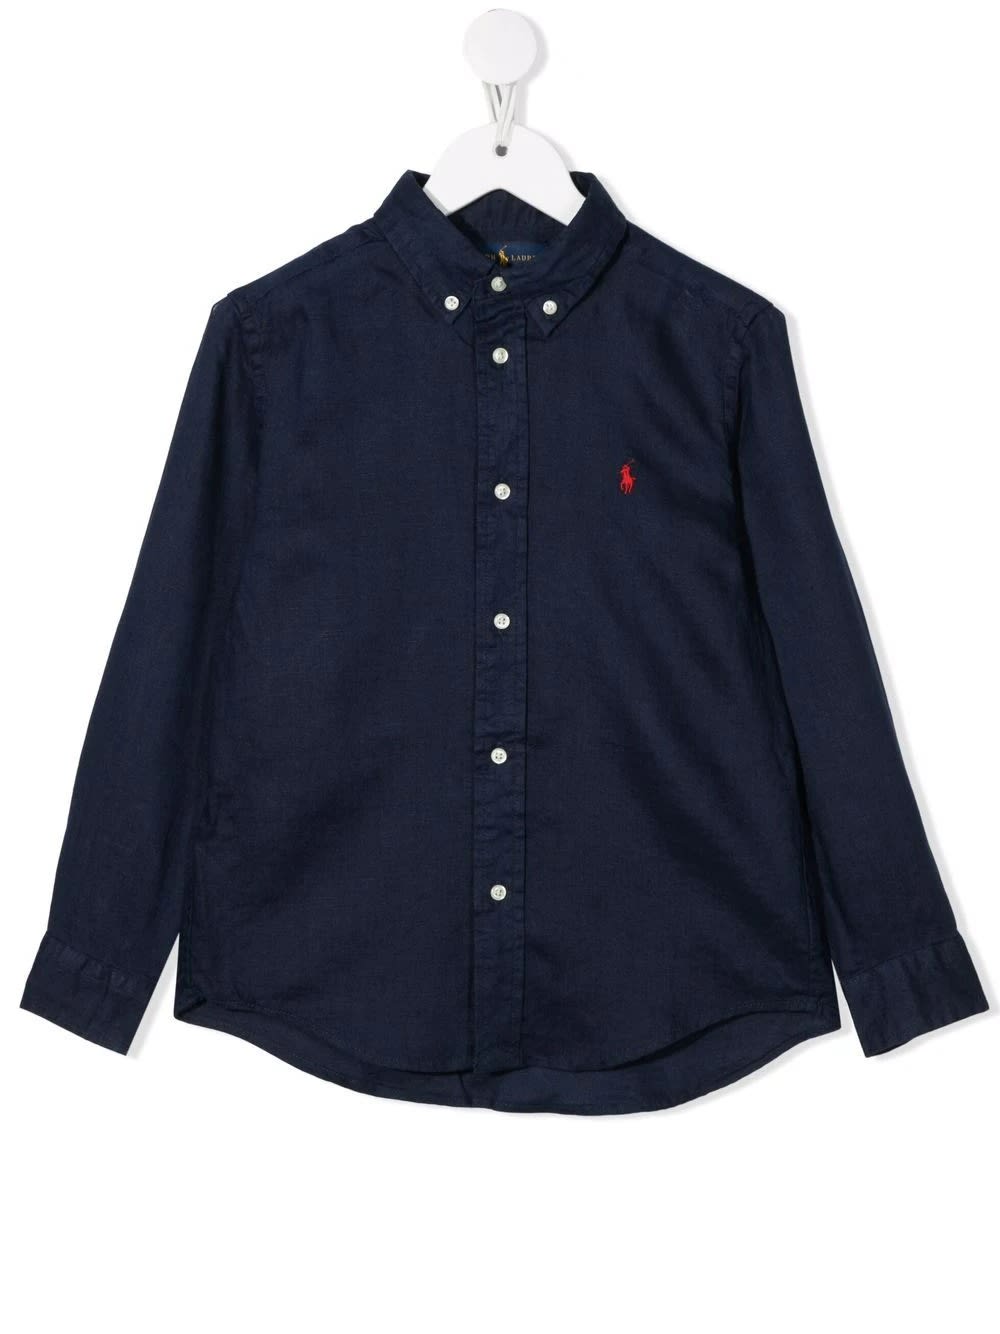 Polo Ralph Lauren Kids' Navy Blue Linen Shirt With Embroidered Pony